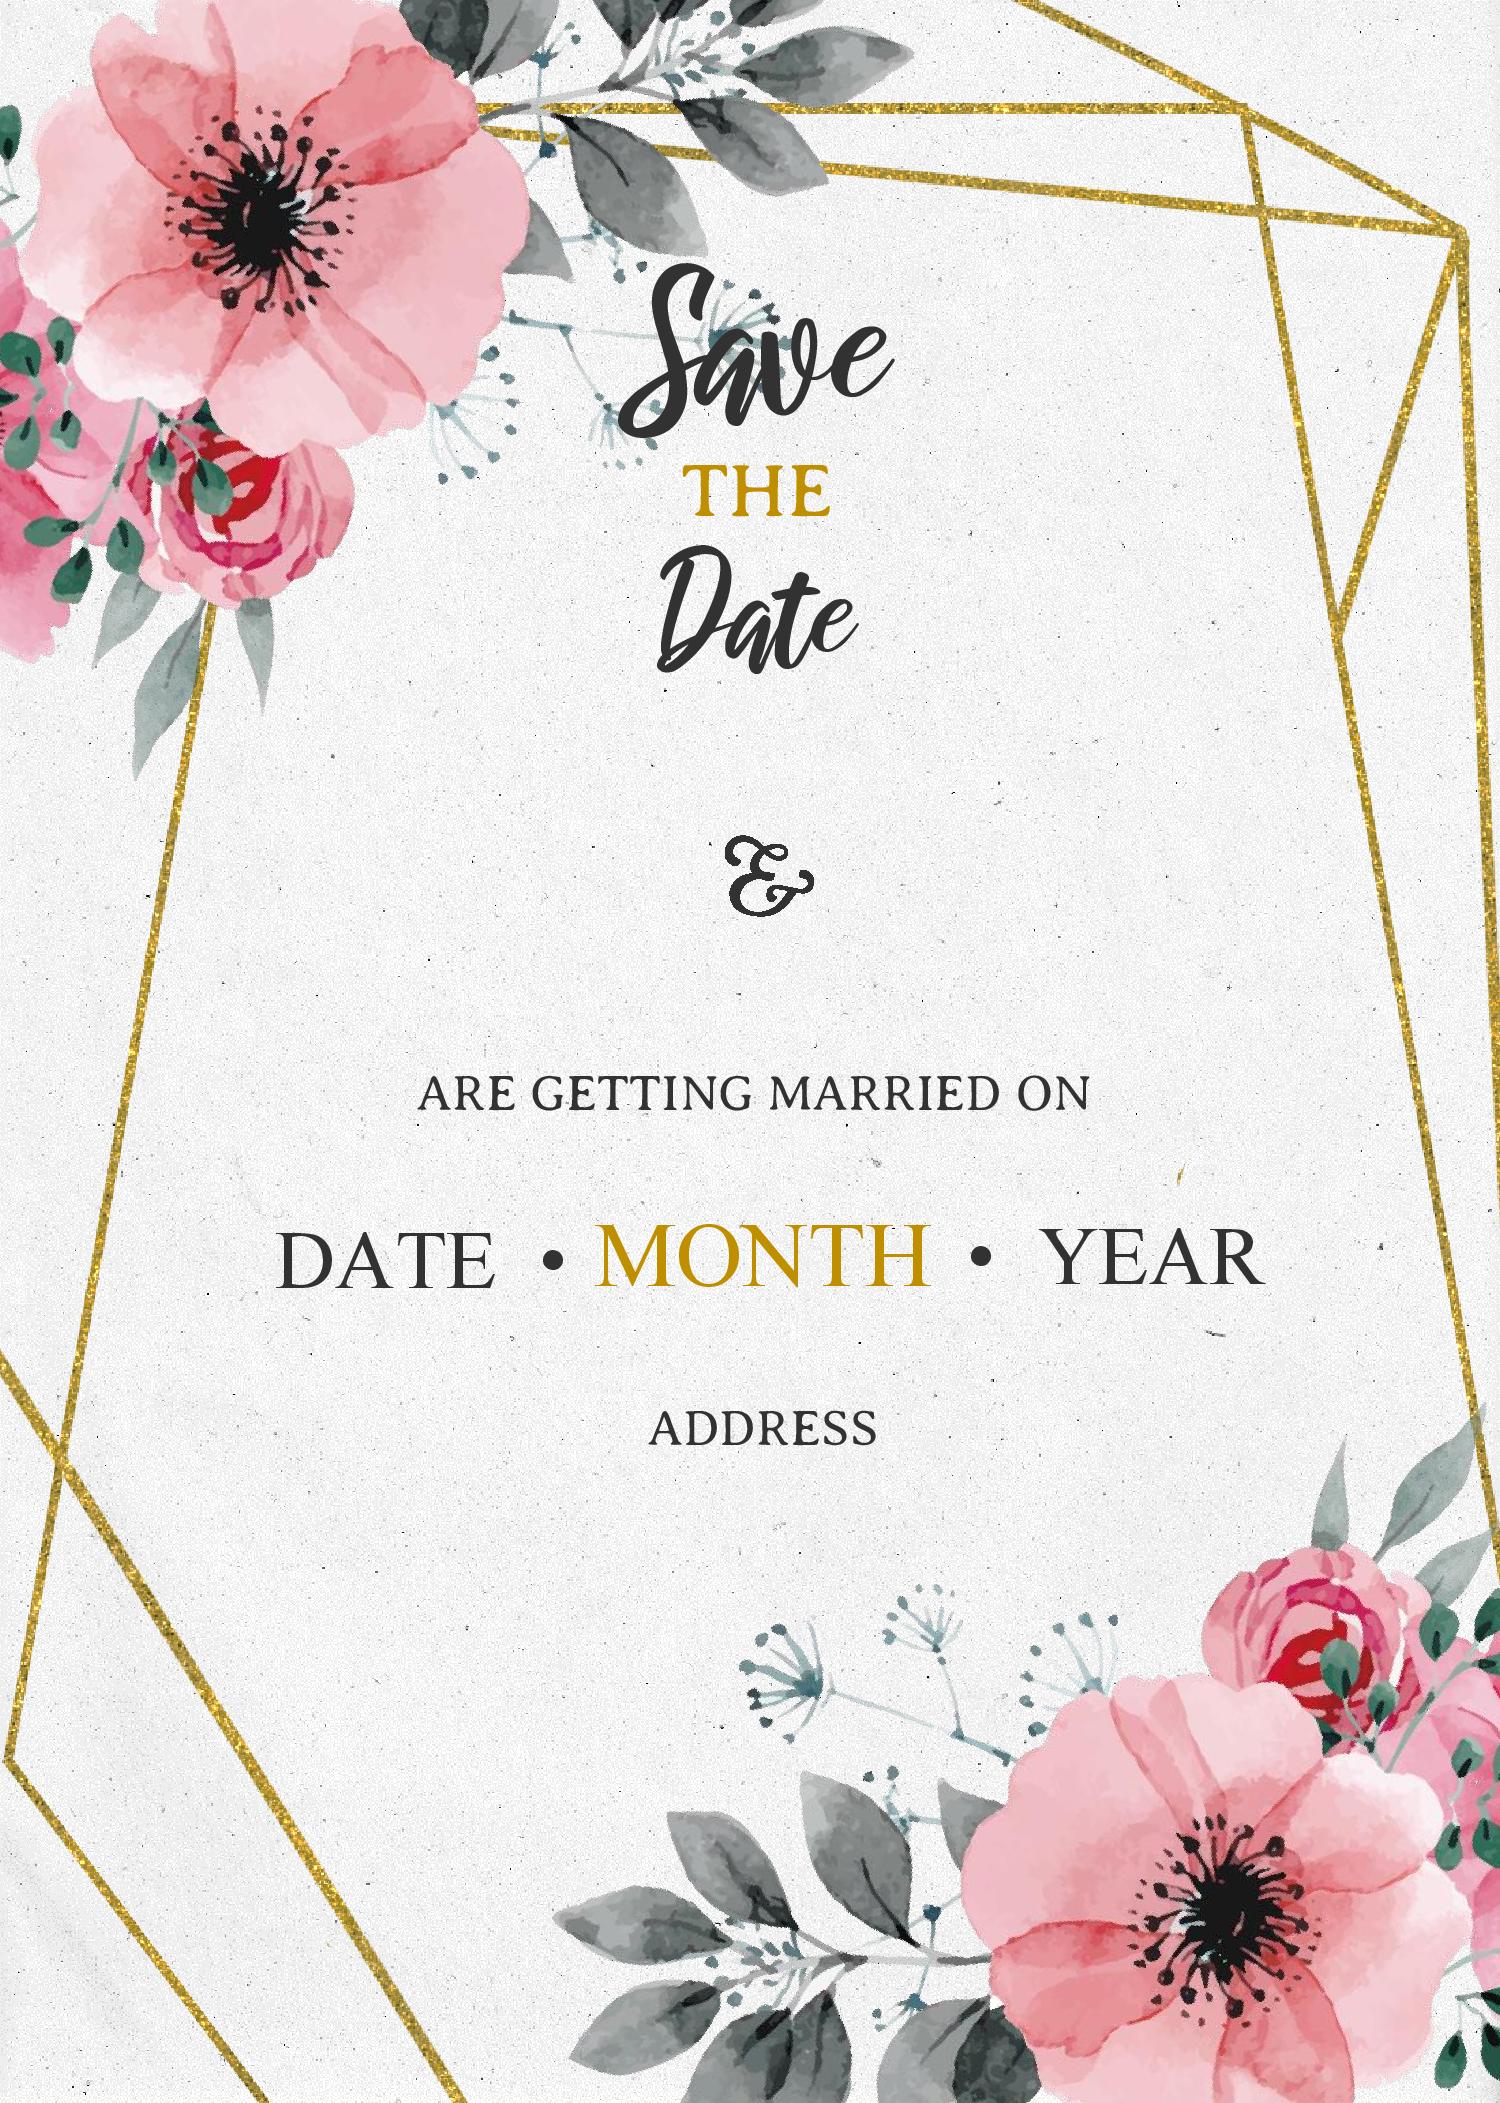 Save The Date Invitation Templates – Editable With MS Word | Download  Hundreds FREE PRINTABLE Birthday Invitation Templates